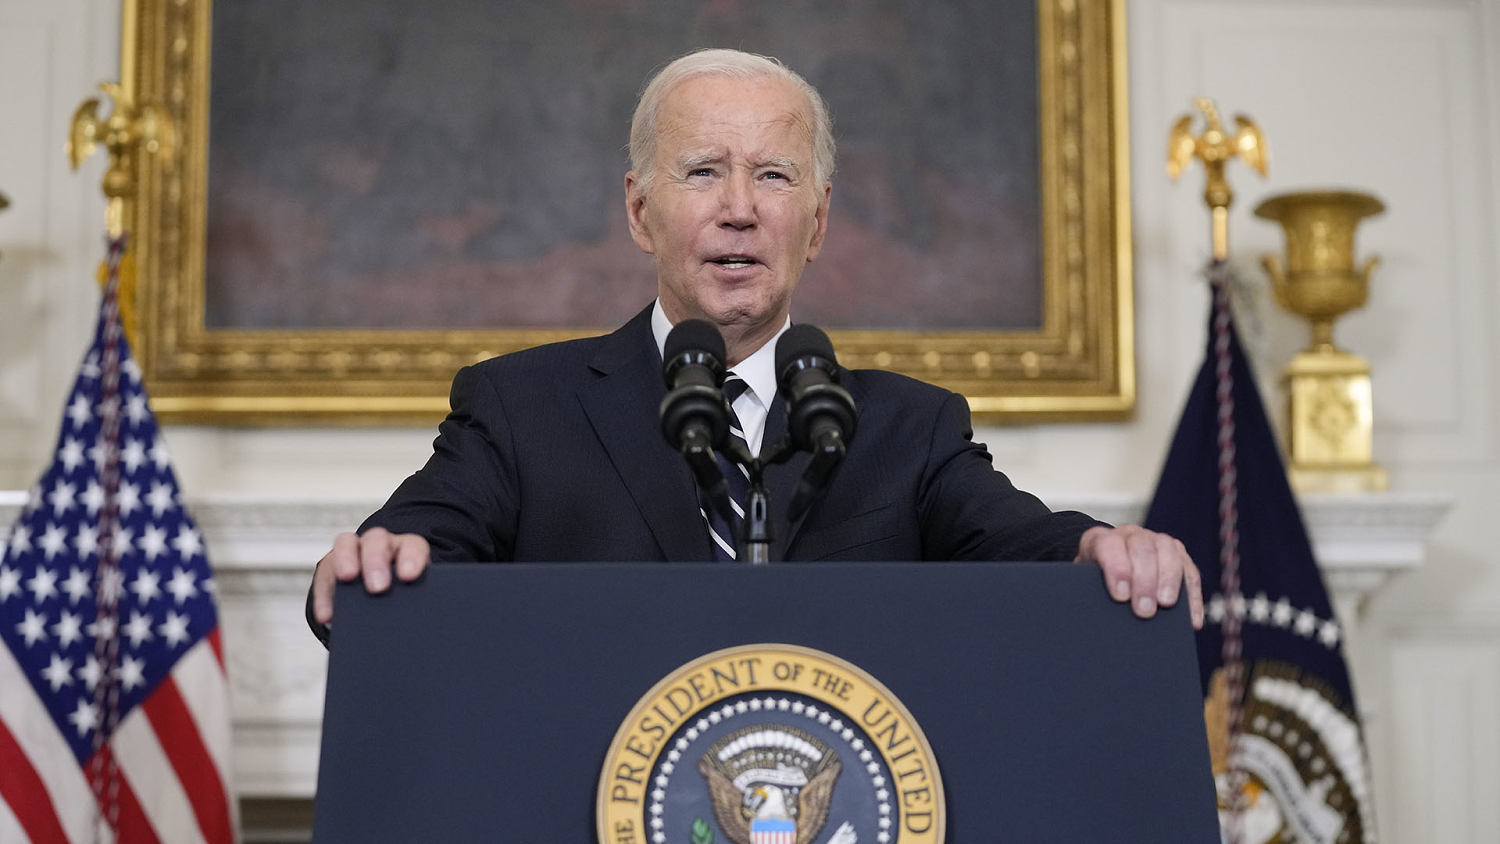 Biden delivers remarks on aid packages for Ukraine and Israel